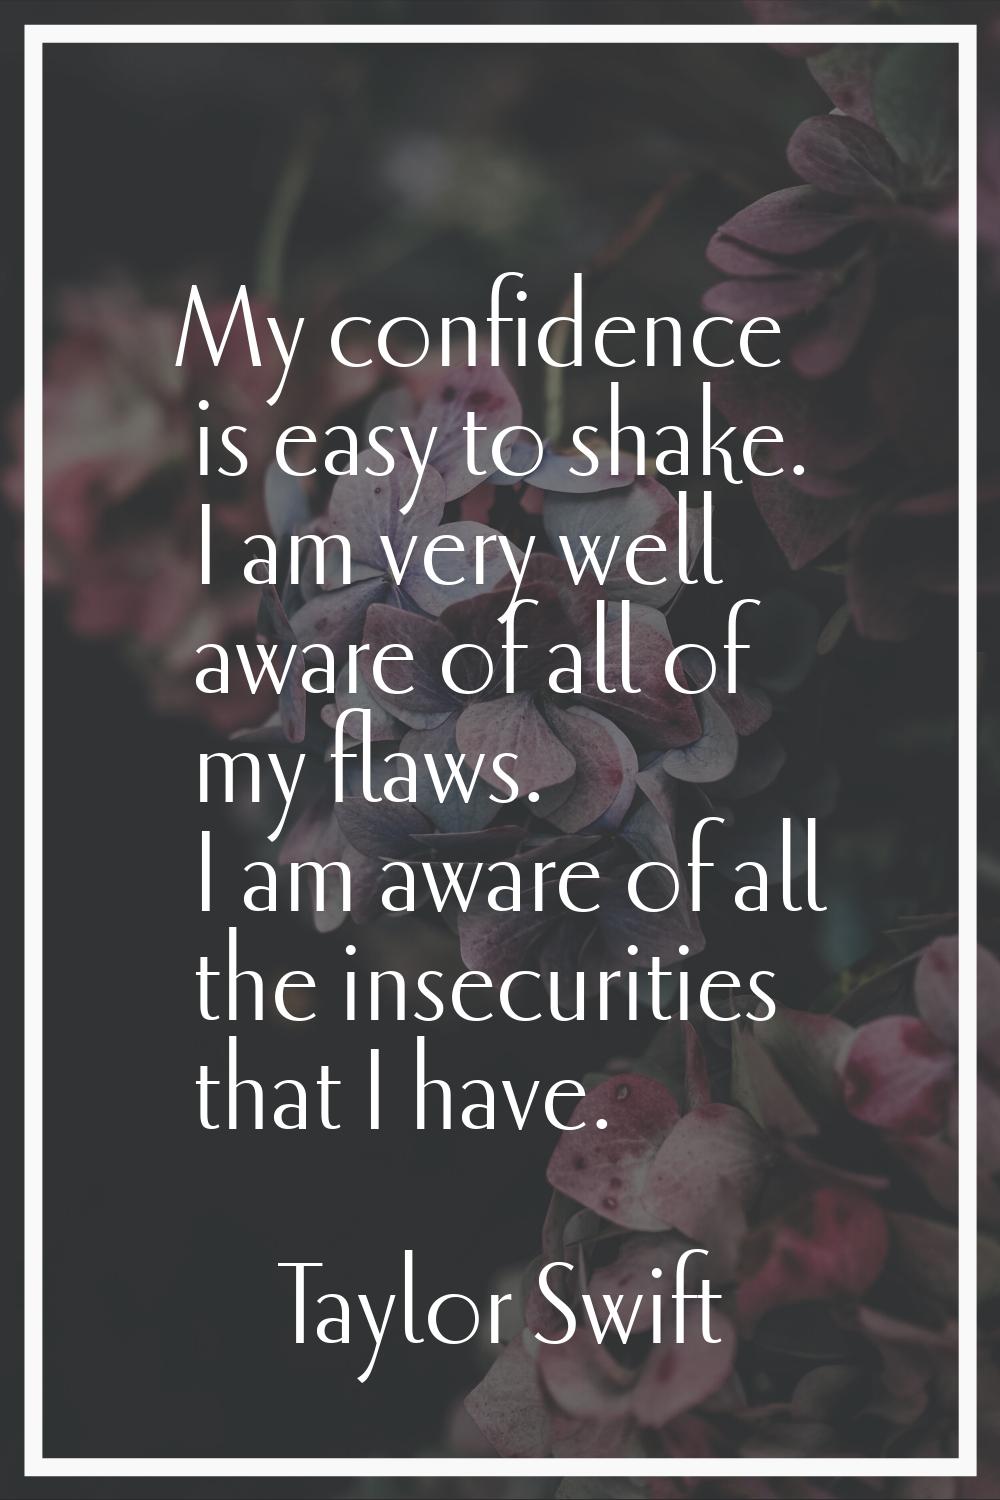 My confidence is easy to shake. I am very well aware of all of my flaws. I am aware of all the inse